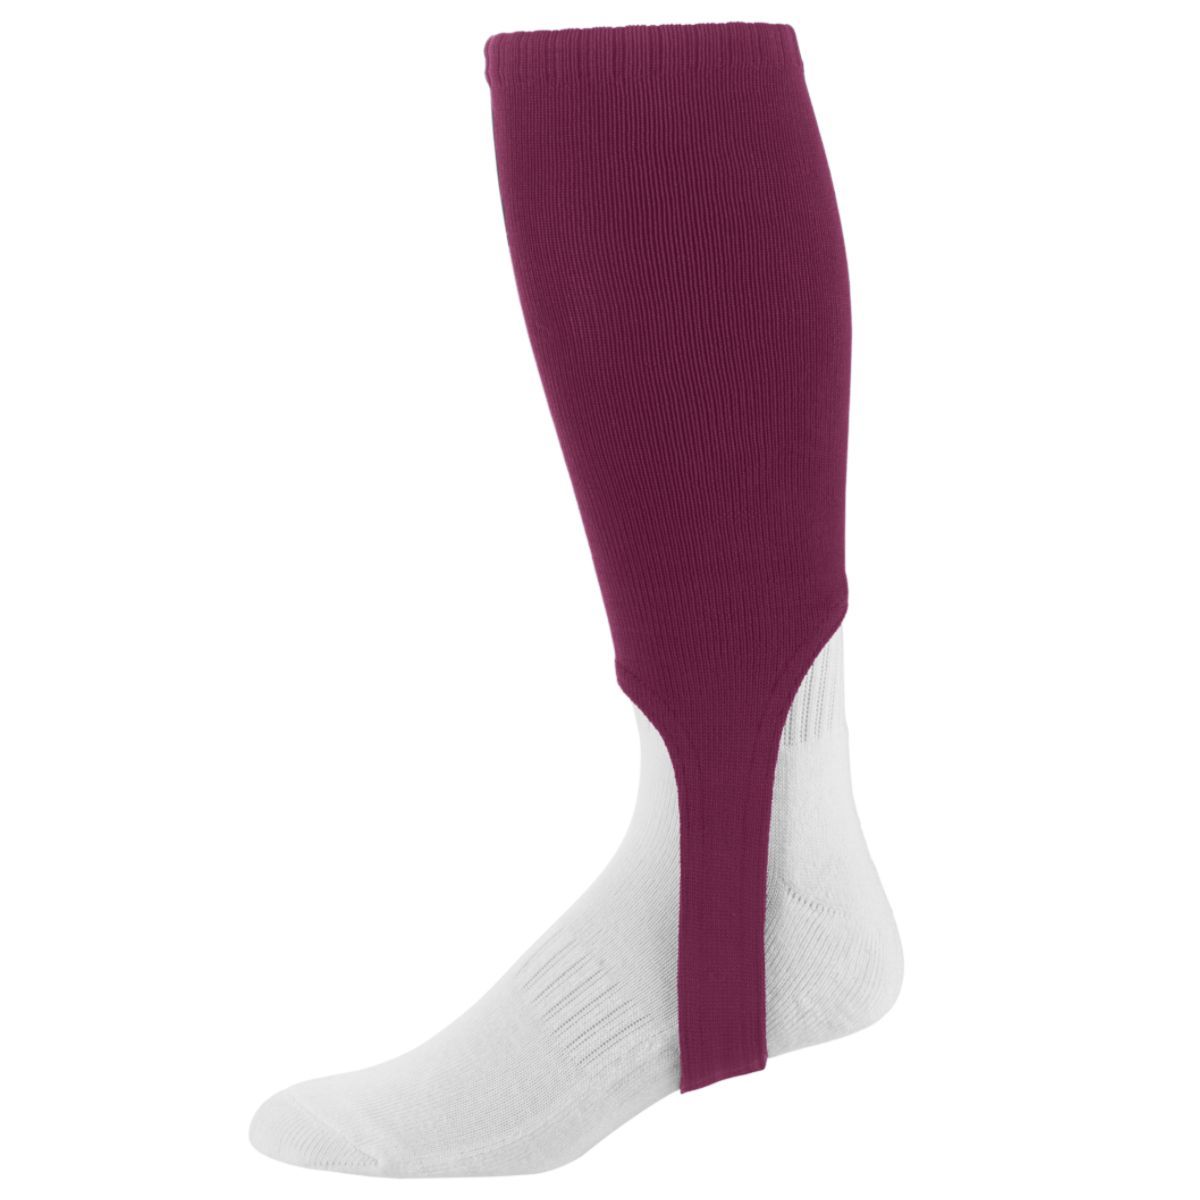 Augusta Sportswear Stirrup Sock in Maroon  -Part of the Accessories, Augusta-Products, Accessories-Socks, Baseball, All-Sports, All-Sports-1 product lines at KanaleyCreations.com